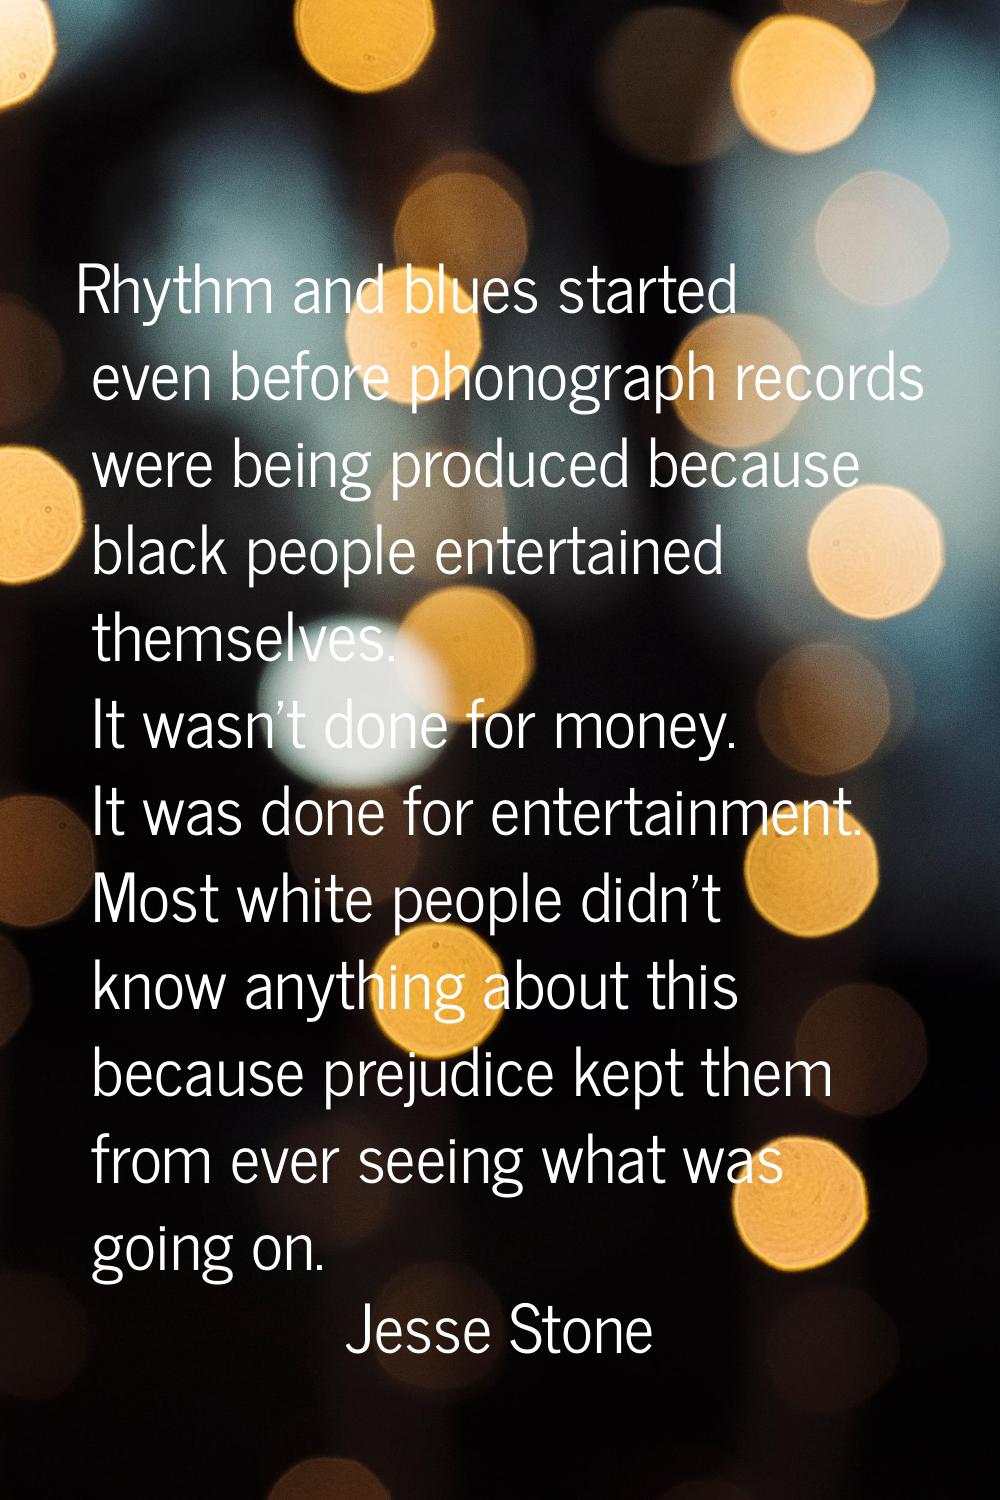 Rhythm and blues started even before phonograph records were being produced because black people en